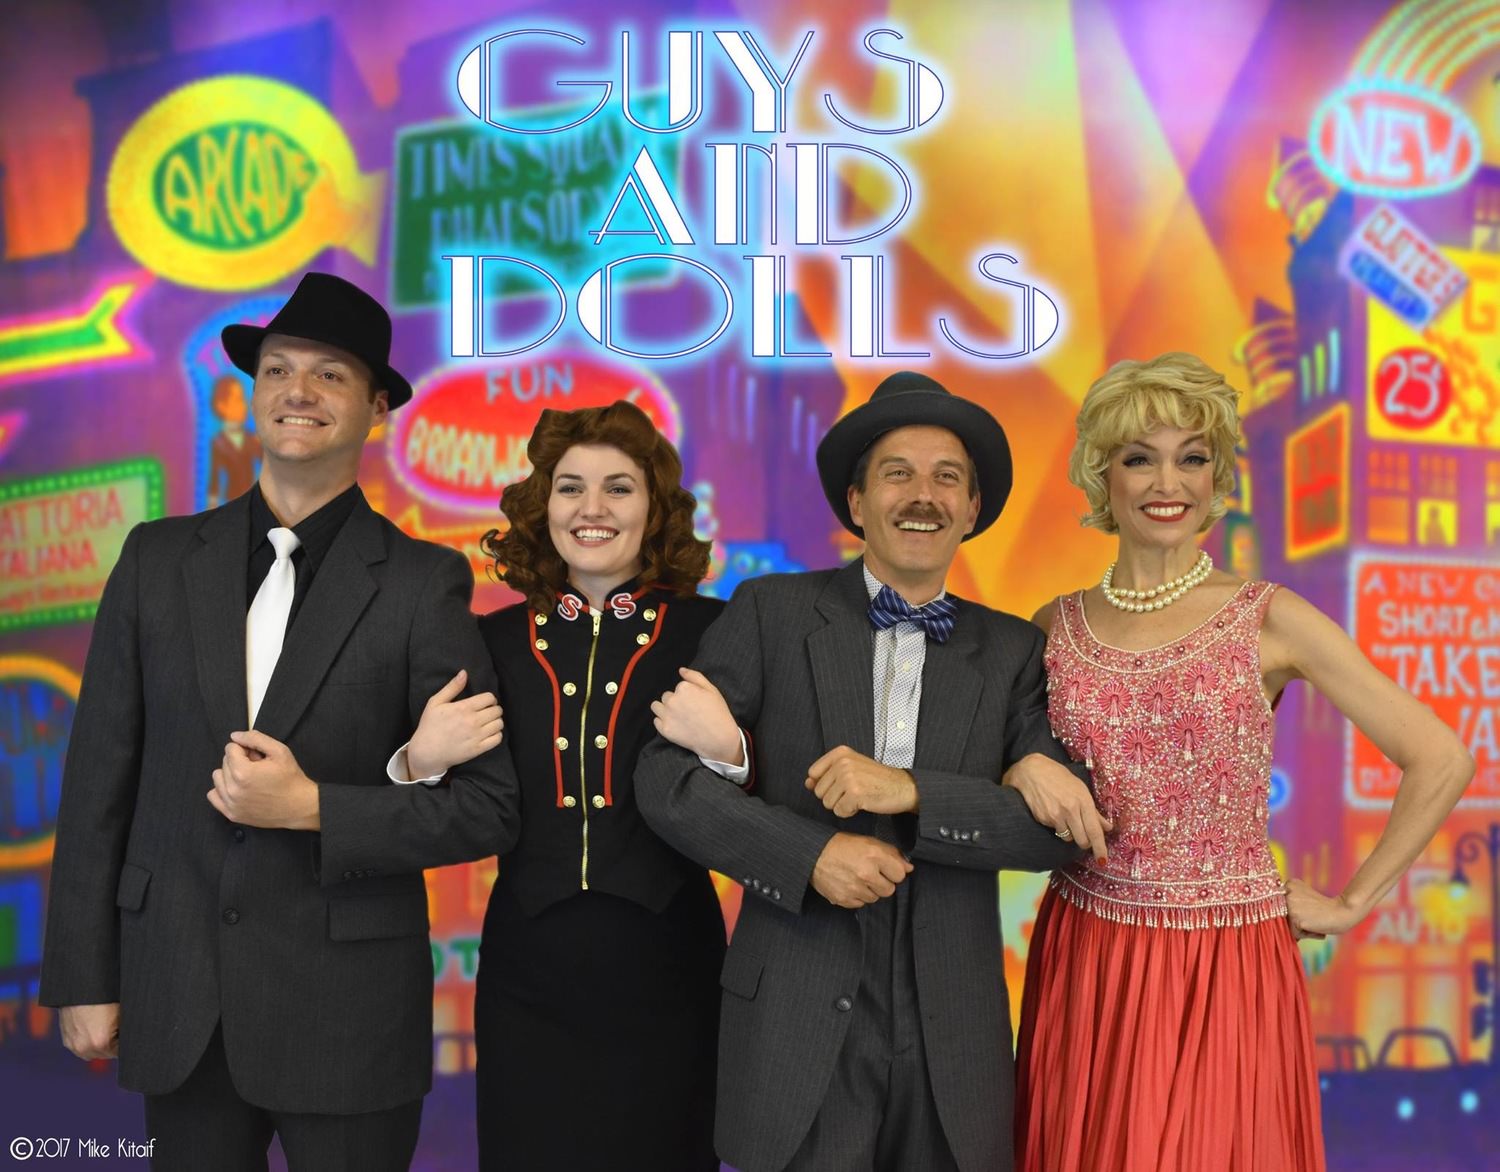 Meet Sky, Sarah, Nathan, and Adelaide in Guys and Dolls at the Athens thru May 14, 2017!
(Andrew LeJeune, Rachel Whittington, Alan Ware, Melanie Veazy)
Photo Credit: Mike Kitaif